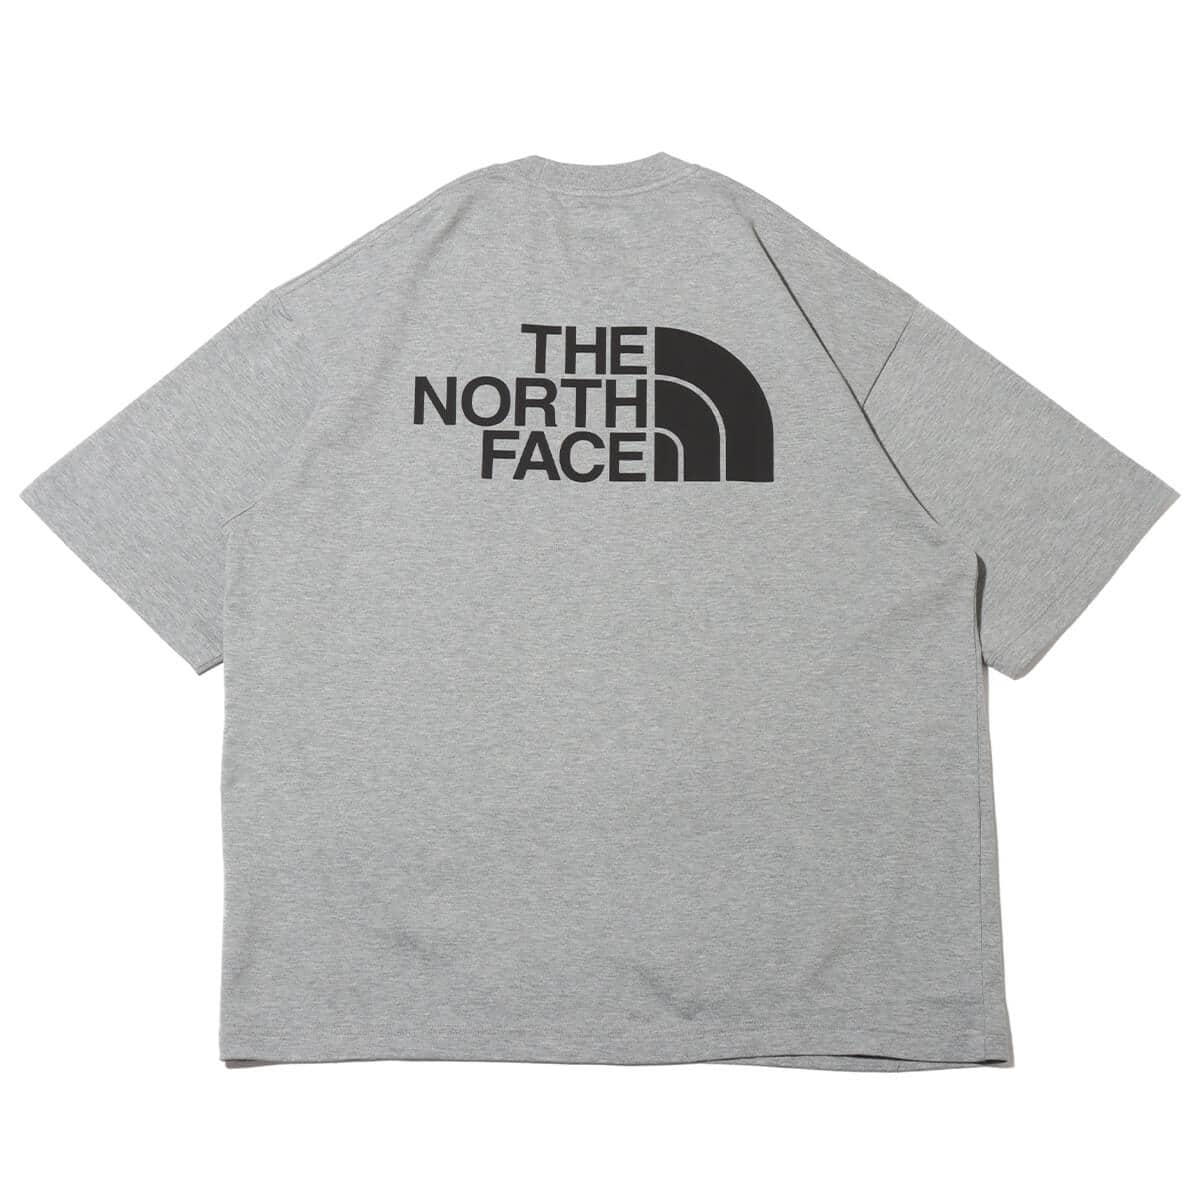 THE NORTH FACE S/S Simple Color Scheme Tee ミックスグレー